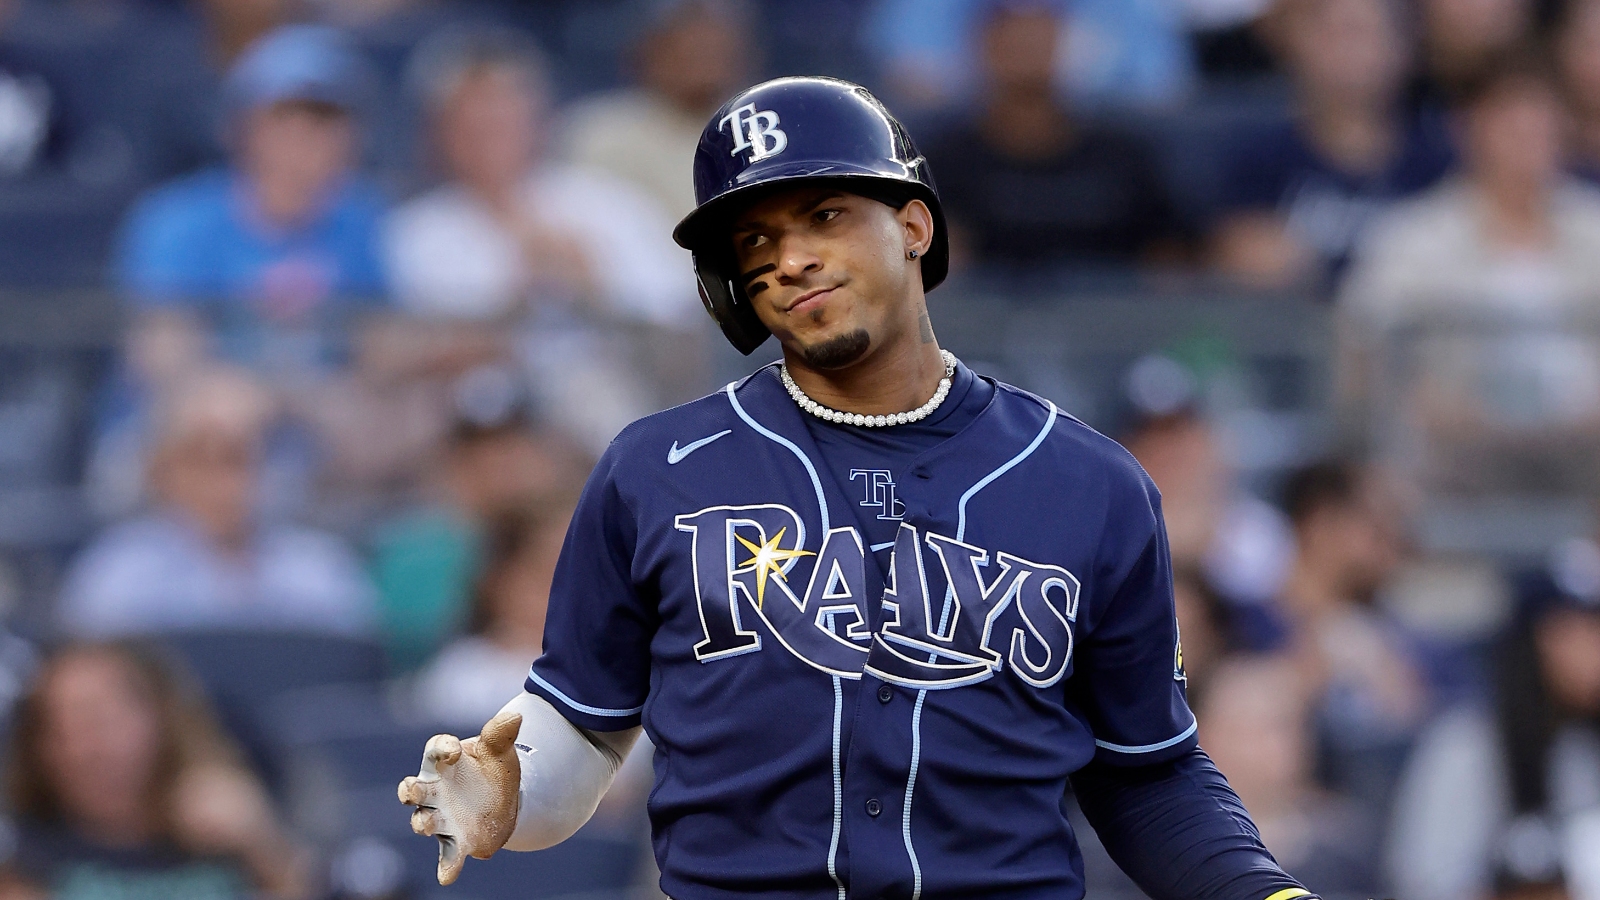 Why has Wander Franco been placed on the Restricted List? Social media posts  against Rays star being investigated